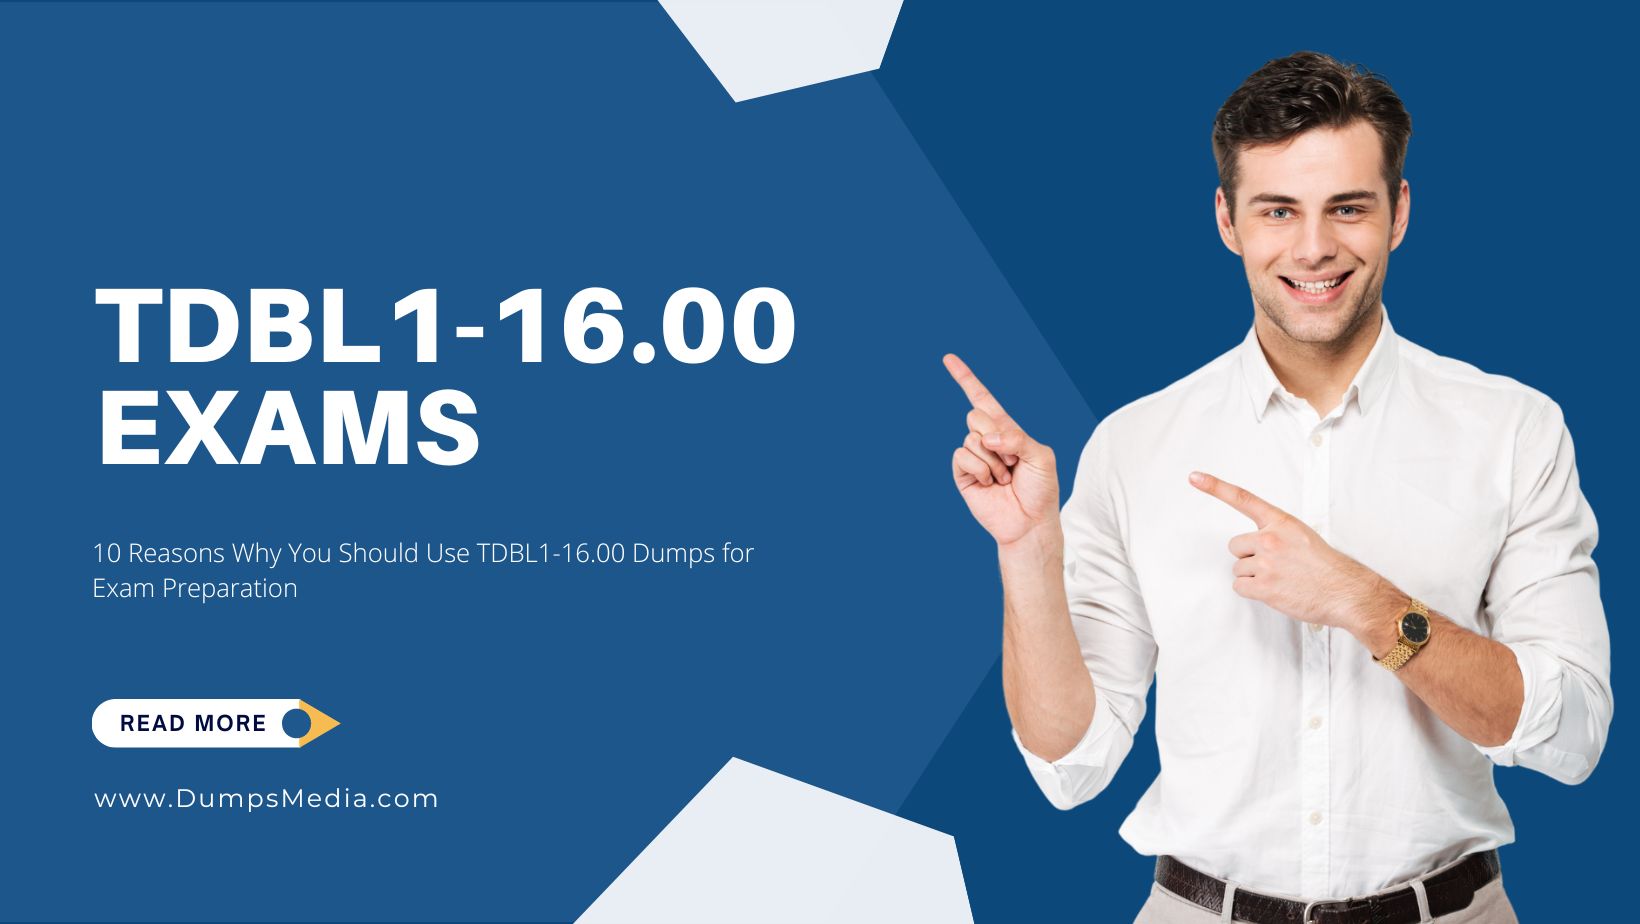 10 Reasons Why You Should Use TDBL1-16.00 Dumps for Exam Preparation